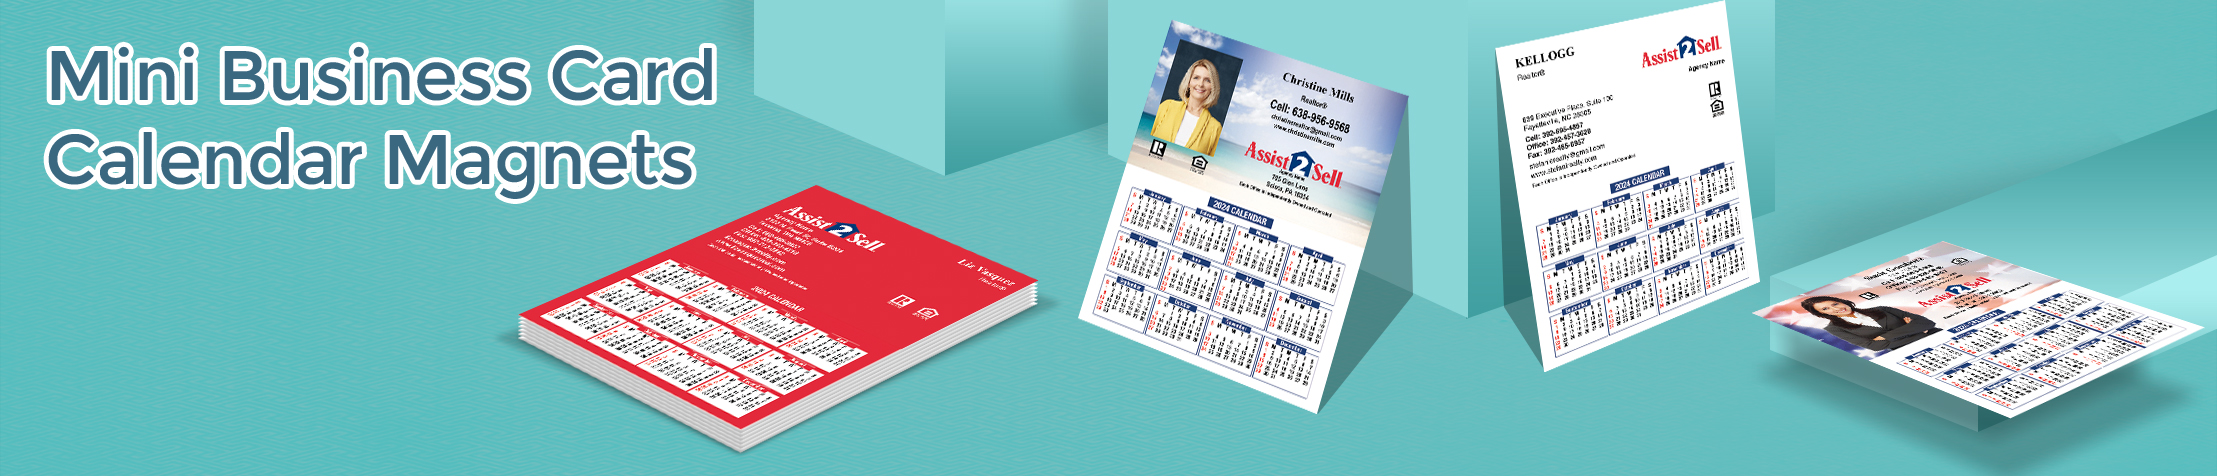 Assist2Sell Real Estate Mini Business Card Calendar Magnets - Assist2Sell Real Estate  2019 calendars with photo and contact info, 3.5” by 4.25” | BestPrintBuy.com